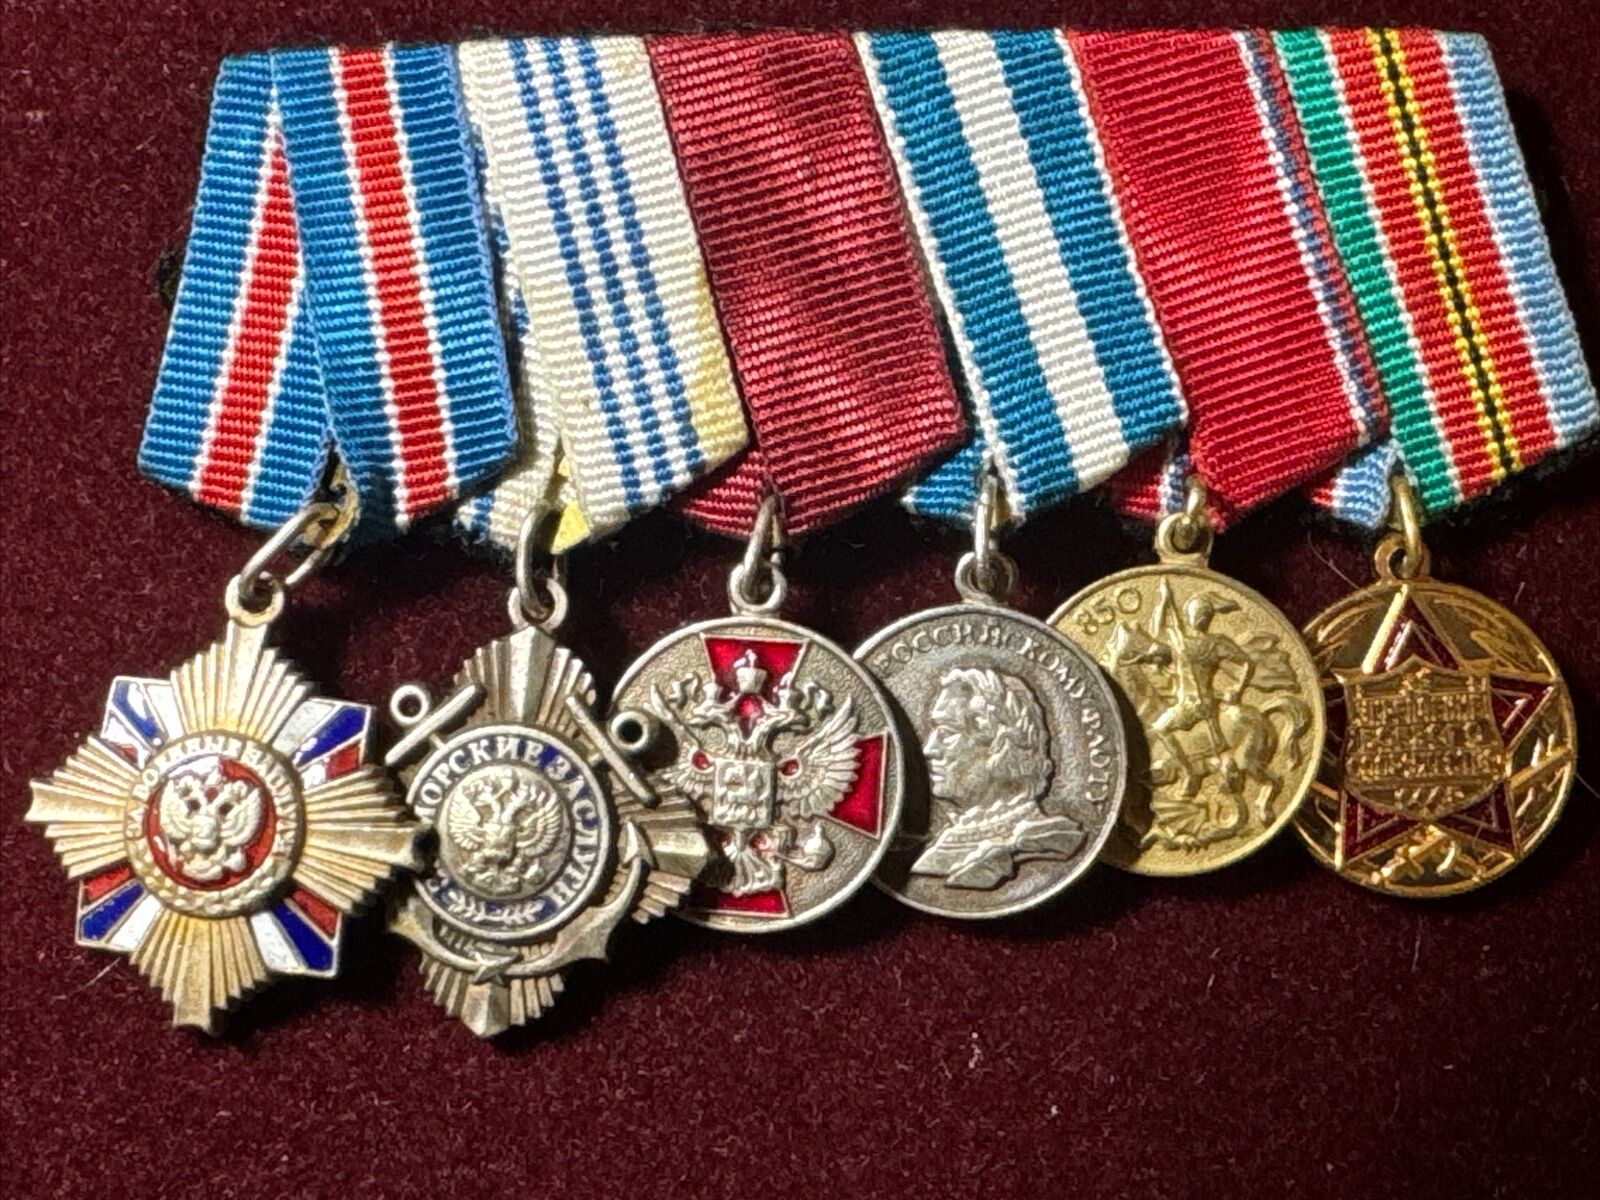 RUSSIAN FED/USSR ORDERs/ Medals  Miniature Bar of 6 Awards 2 Orders 4 Medals